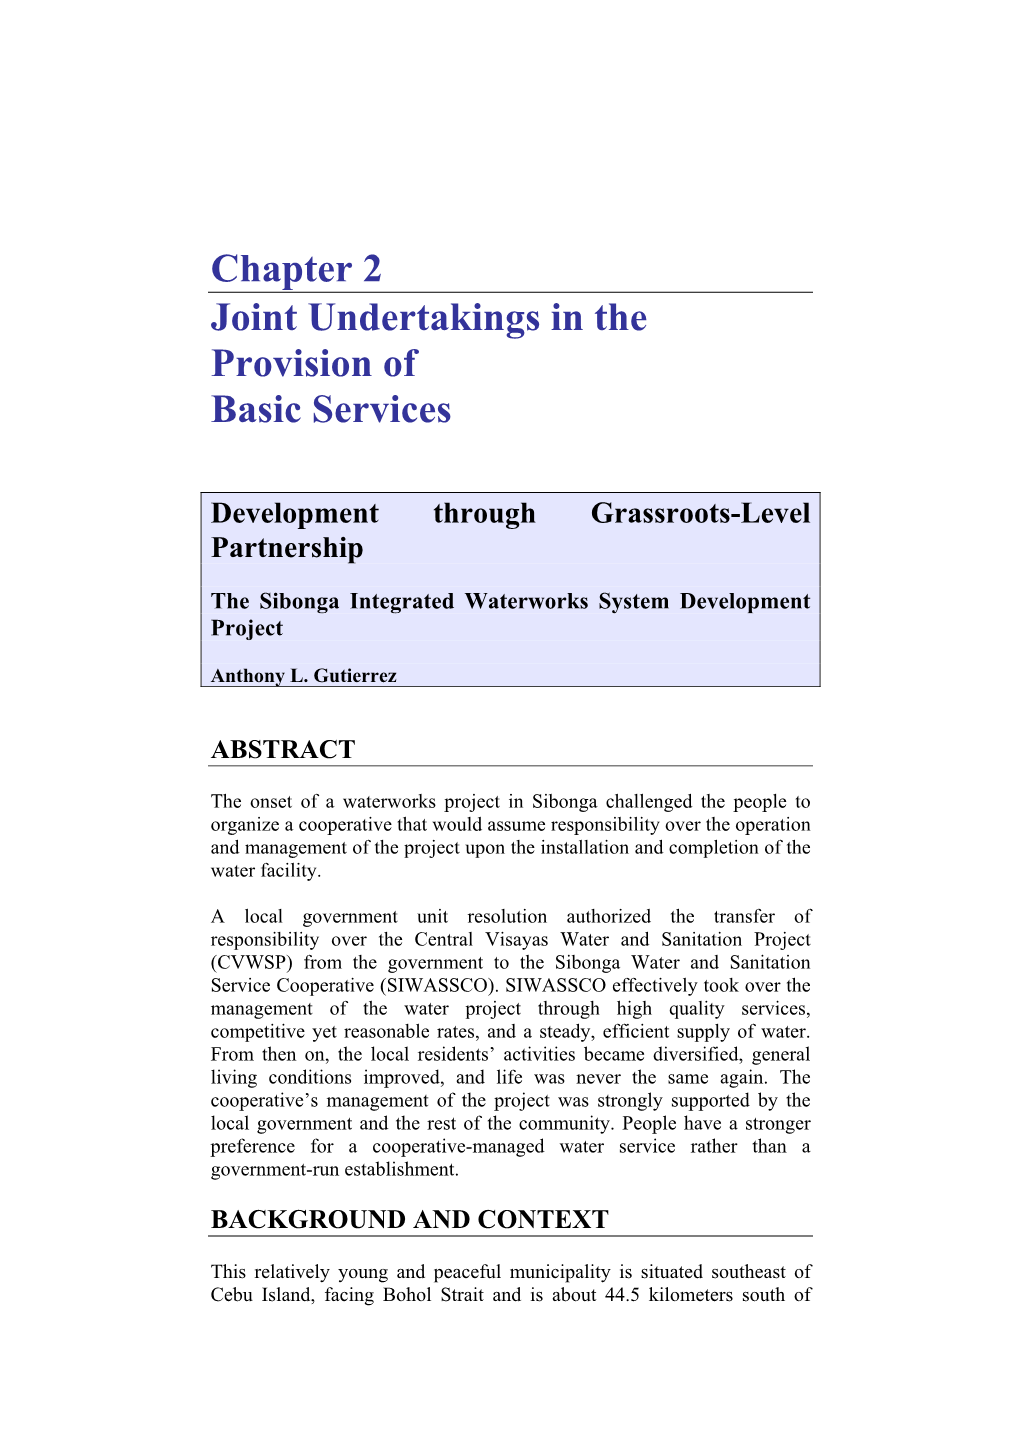 Chapter 2 Joint Undertakings in the Provision of Basic Services